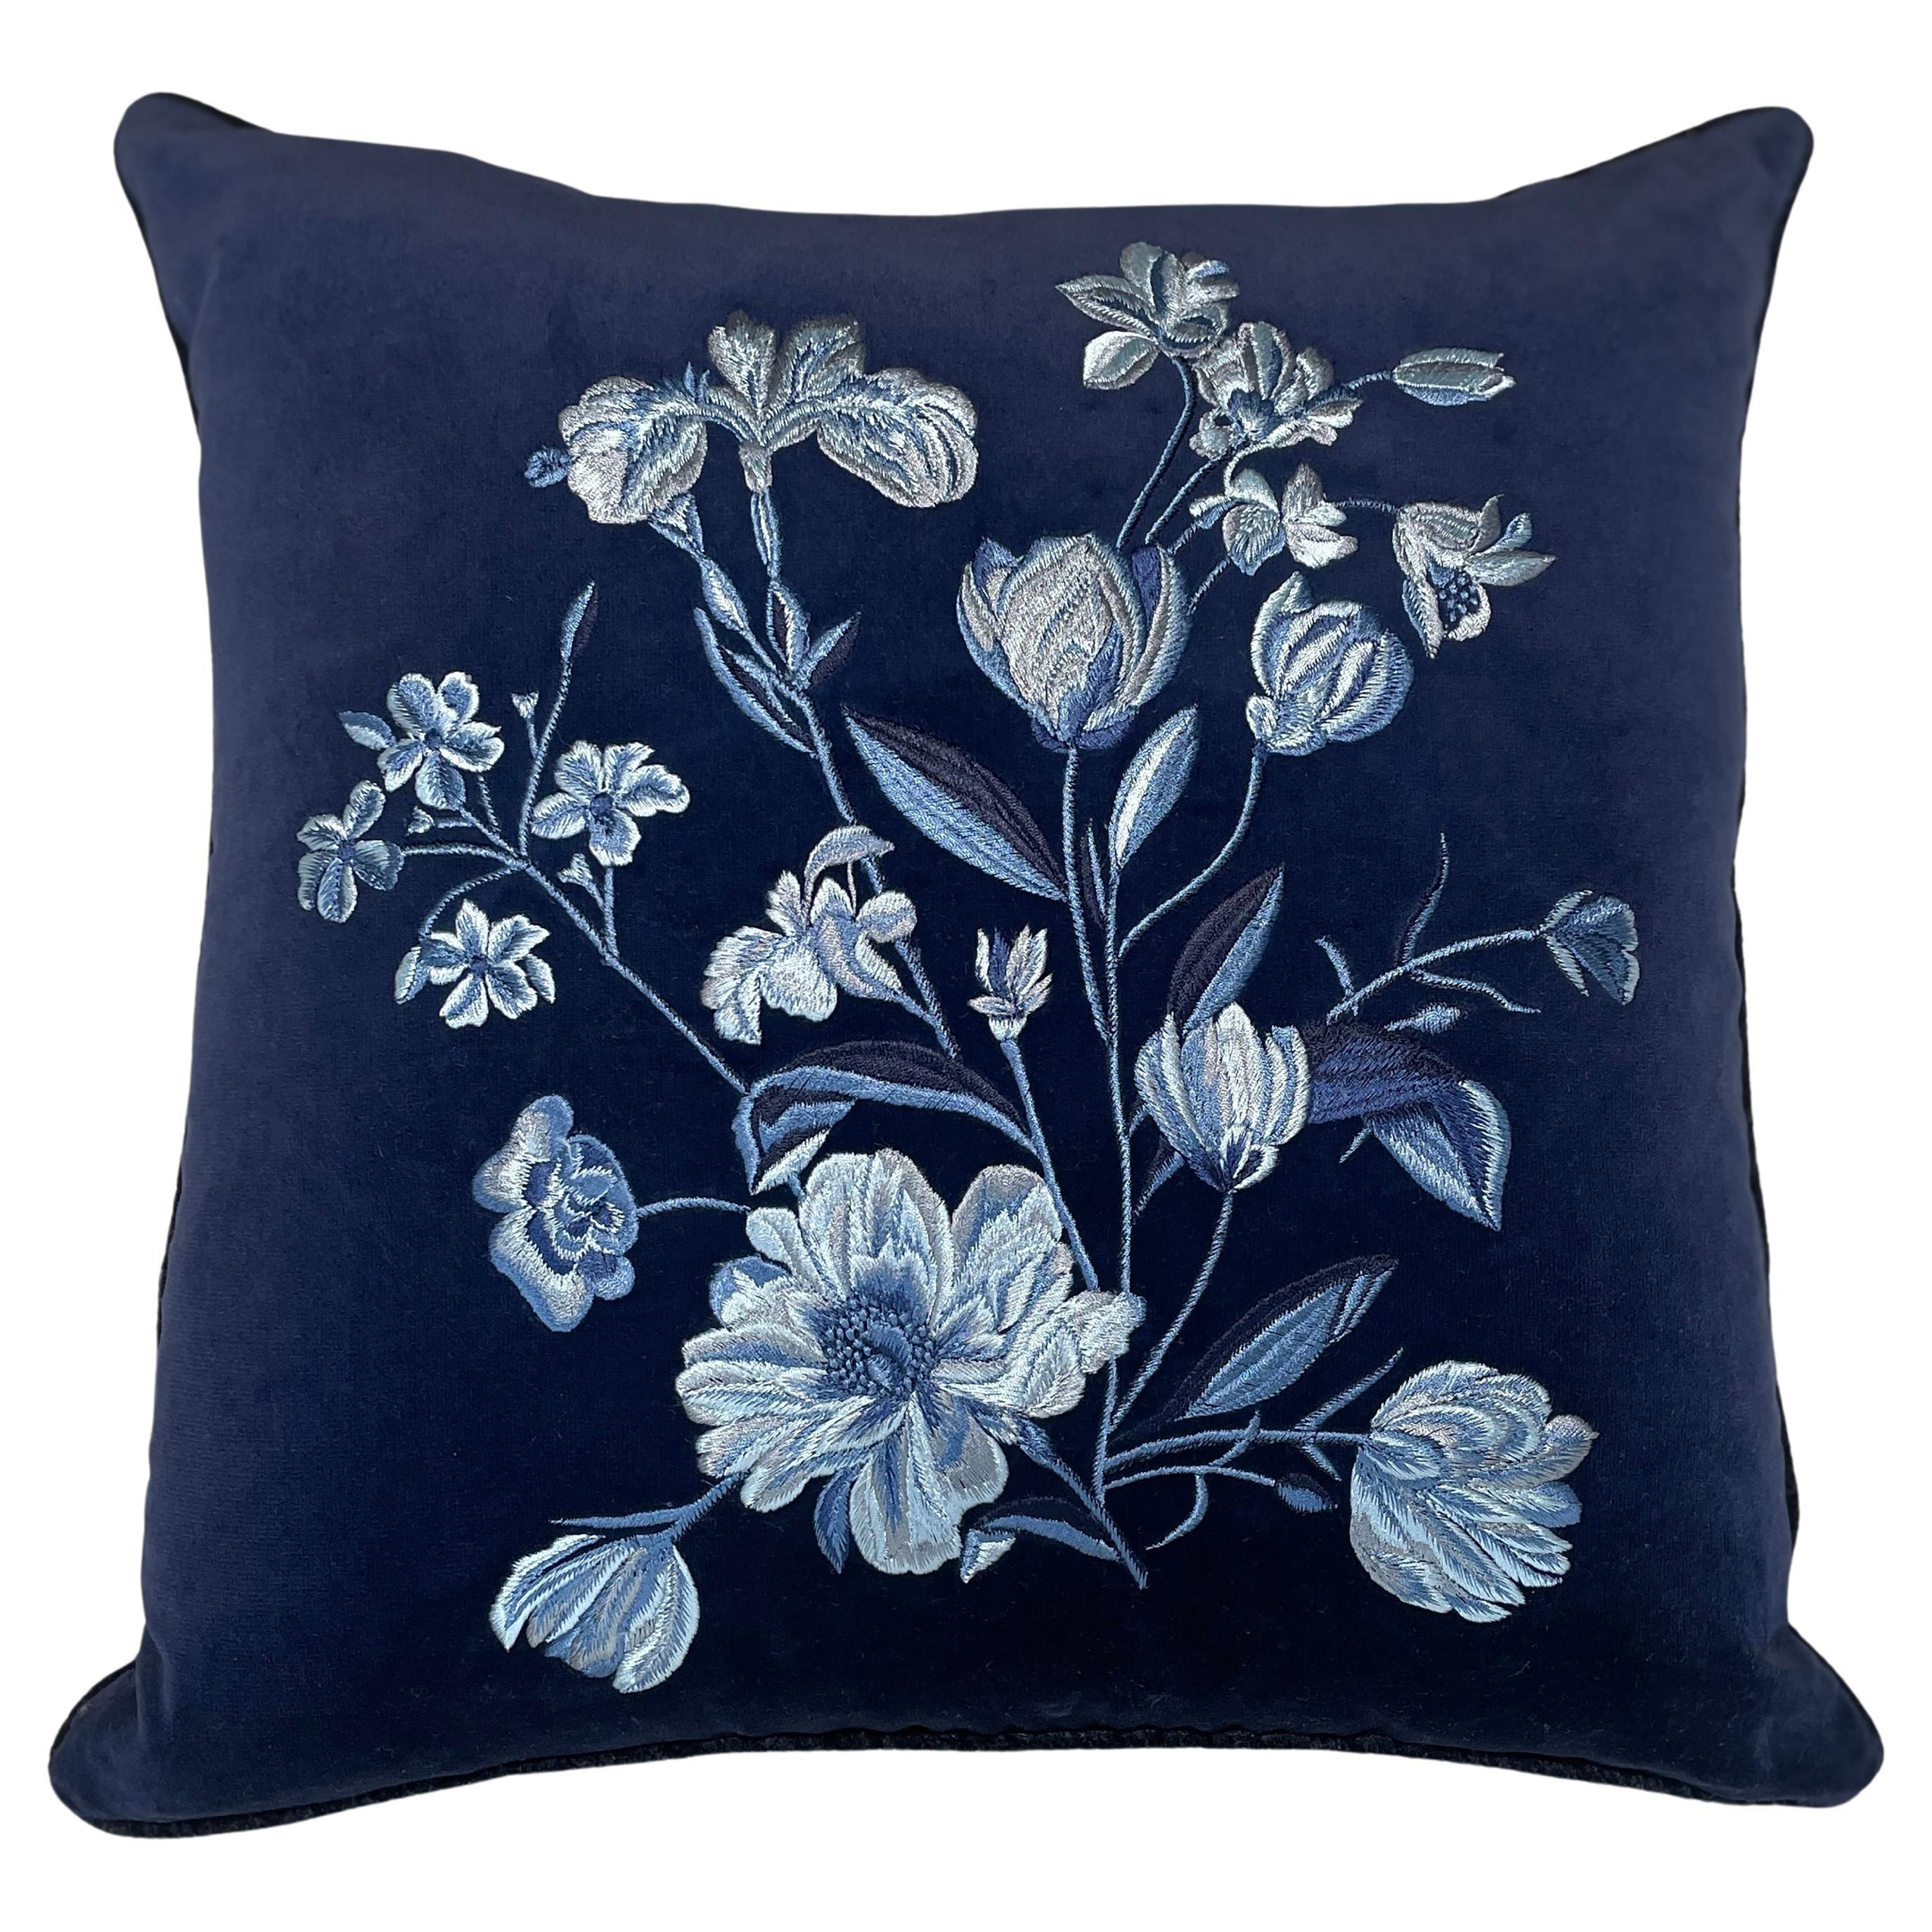 Botanical hand-embroidered navy velvet accent pillow with tonal piping